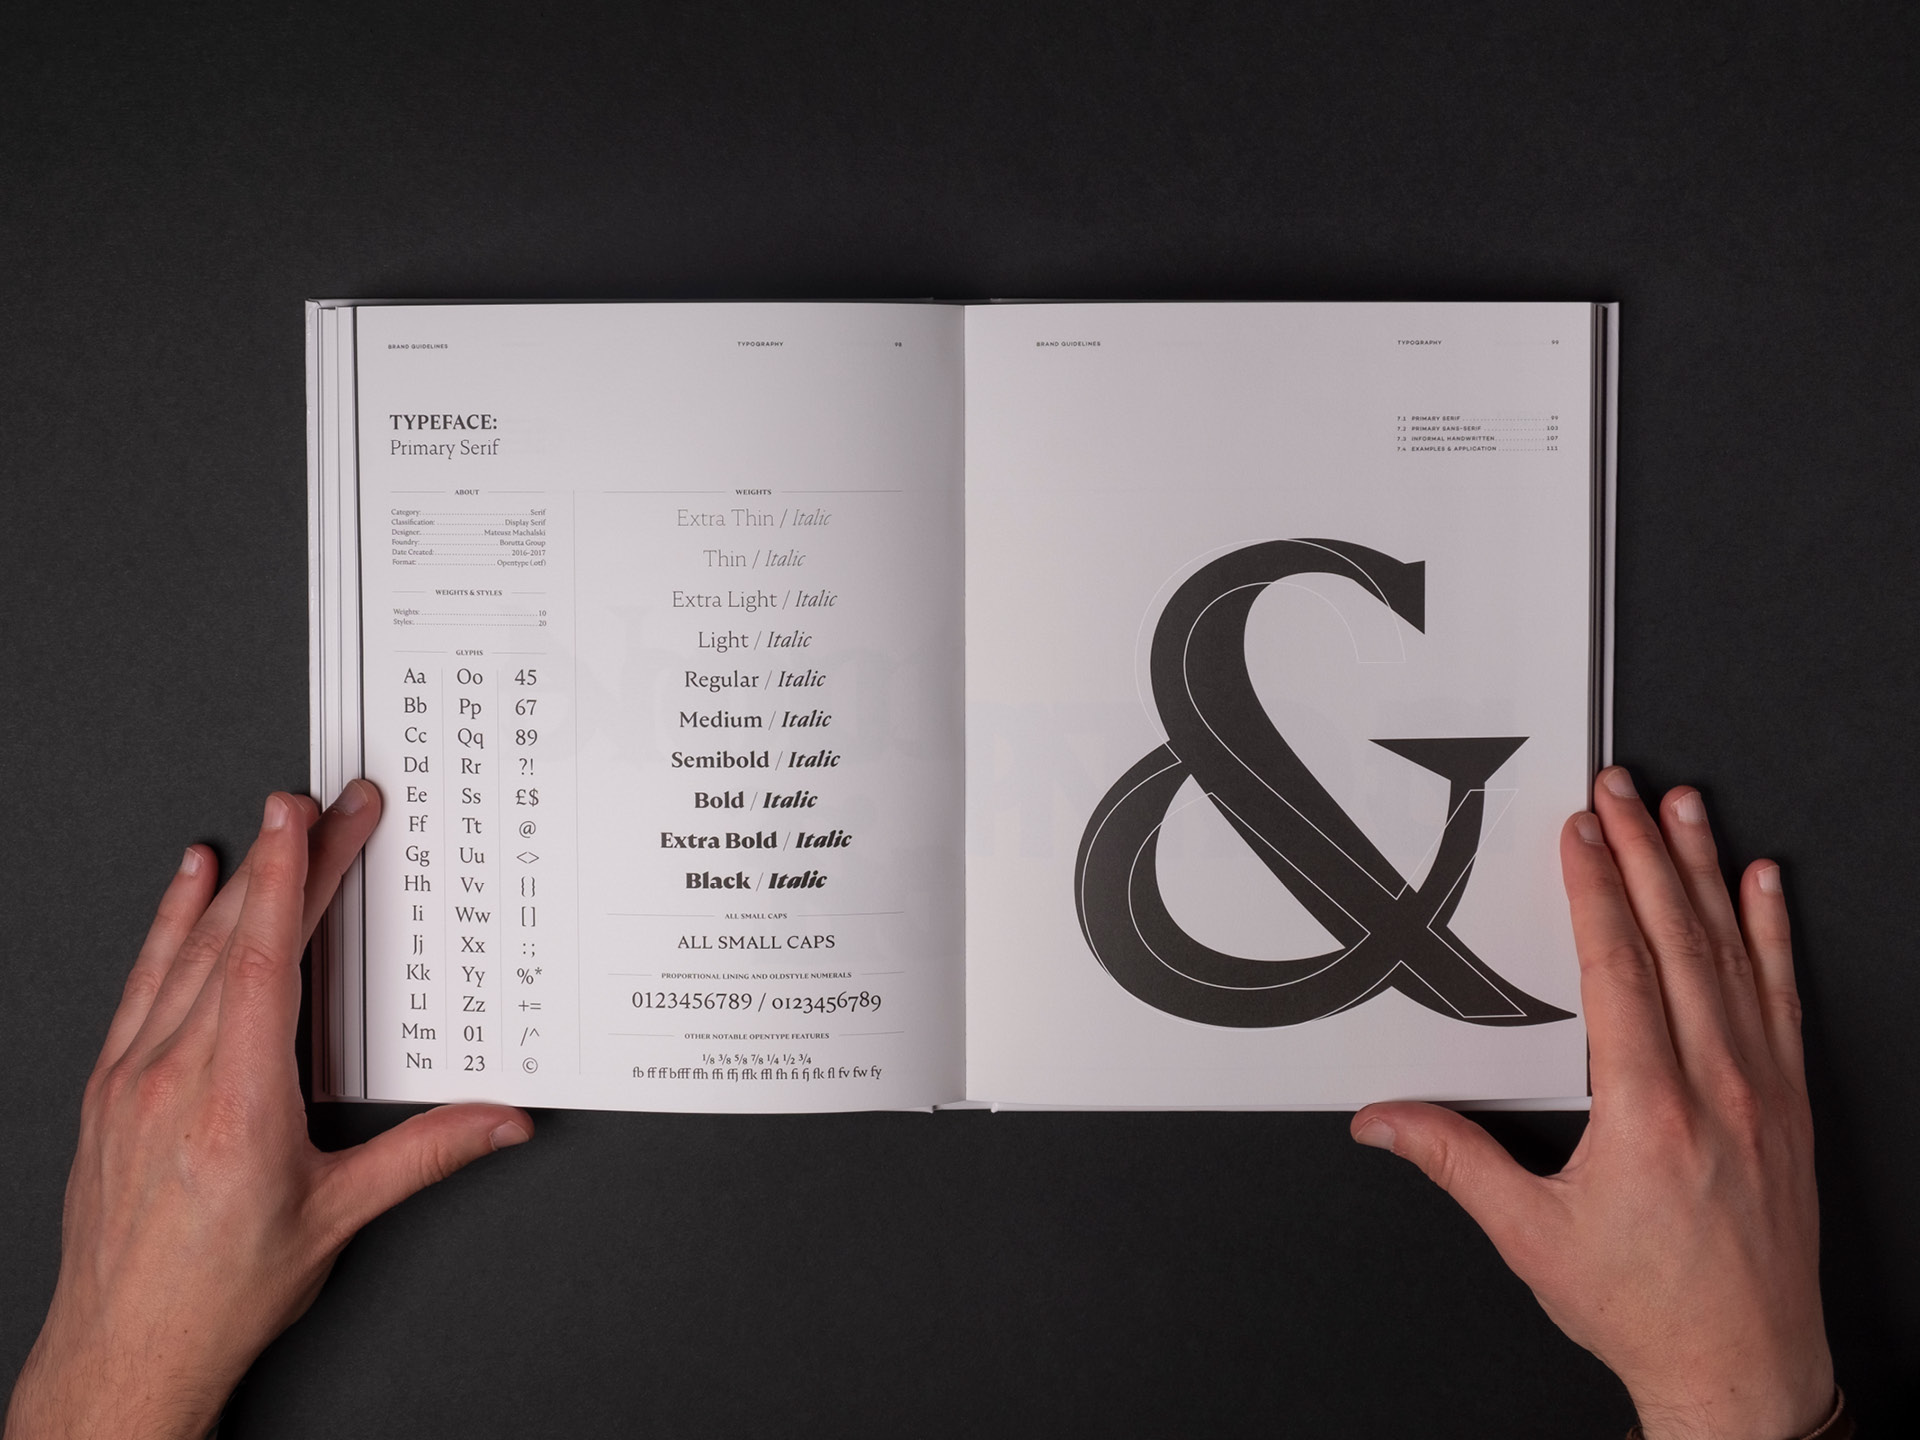 A spread showcasing the various components of the serif typeface Nocturne serif